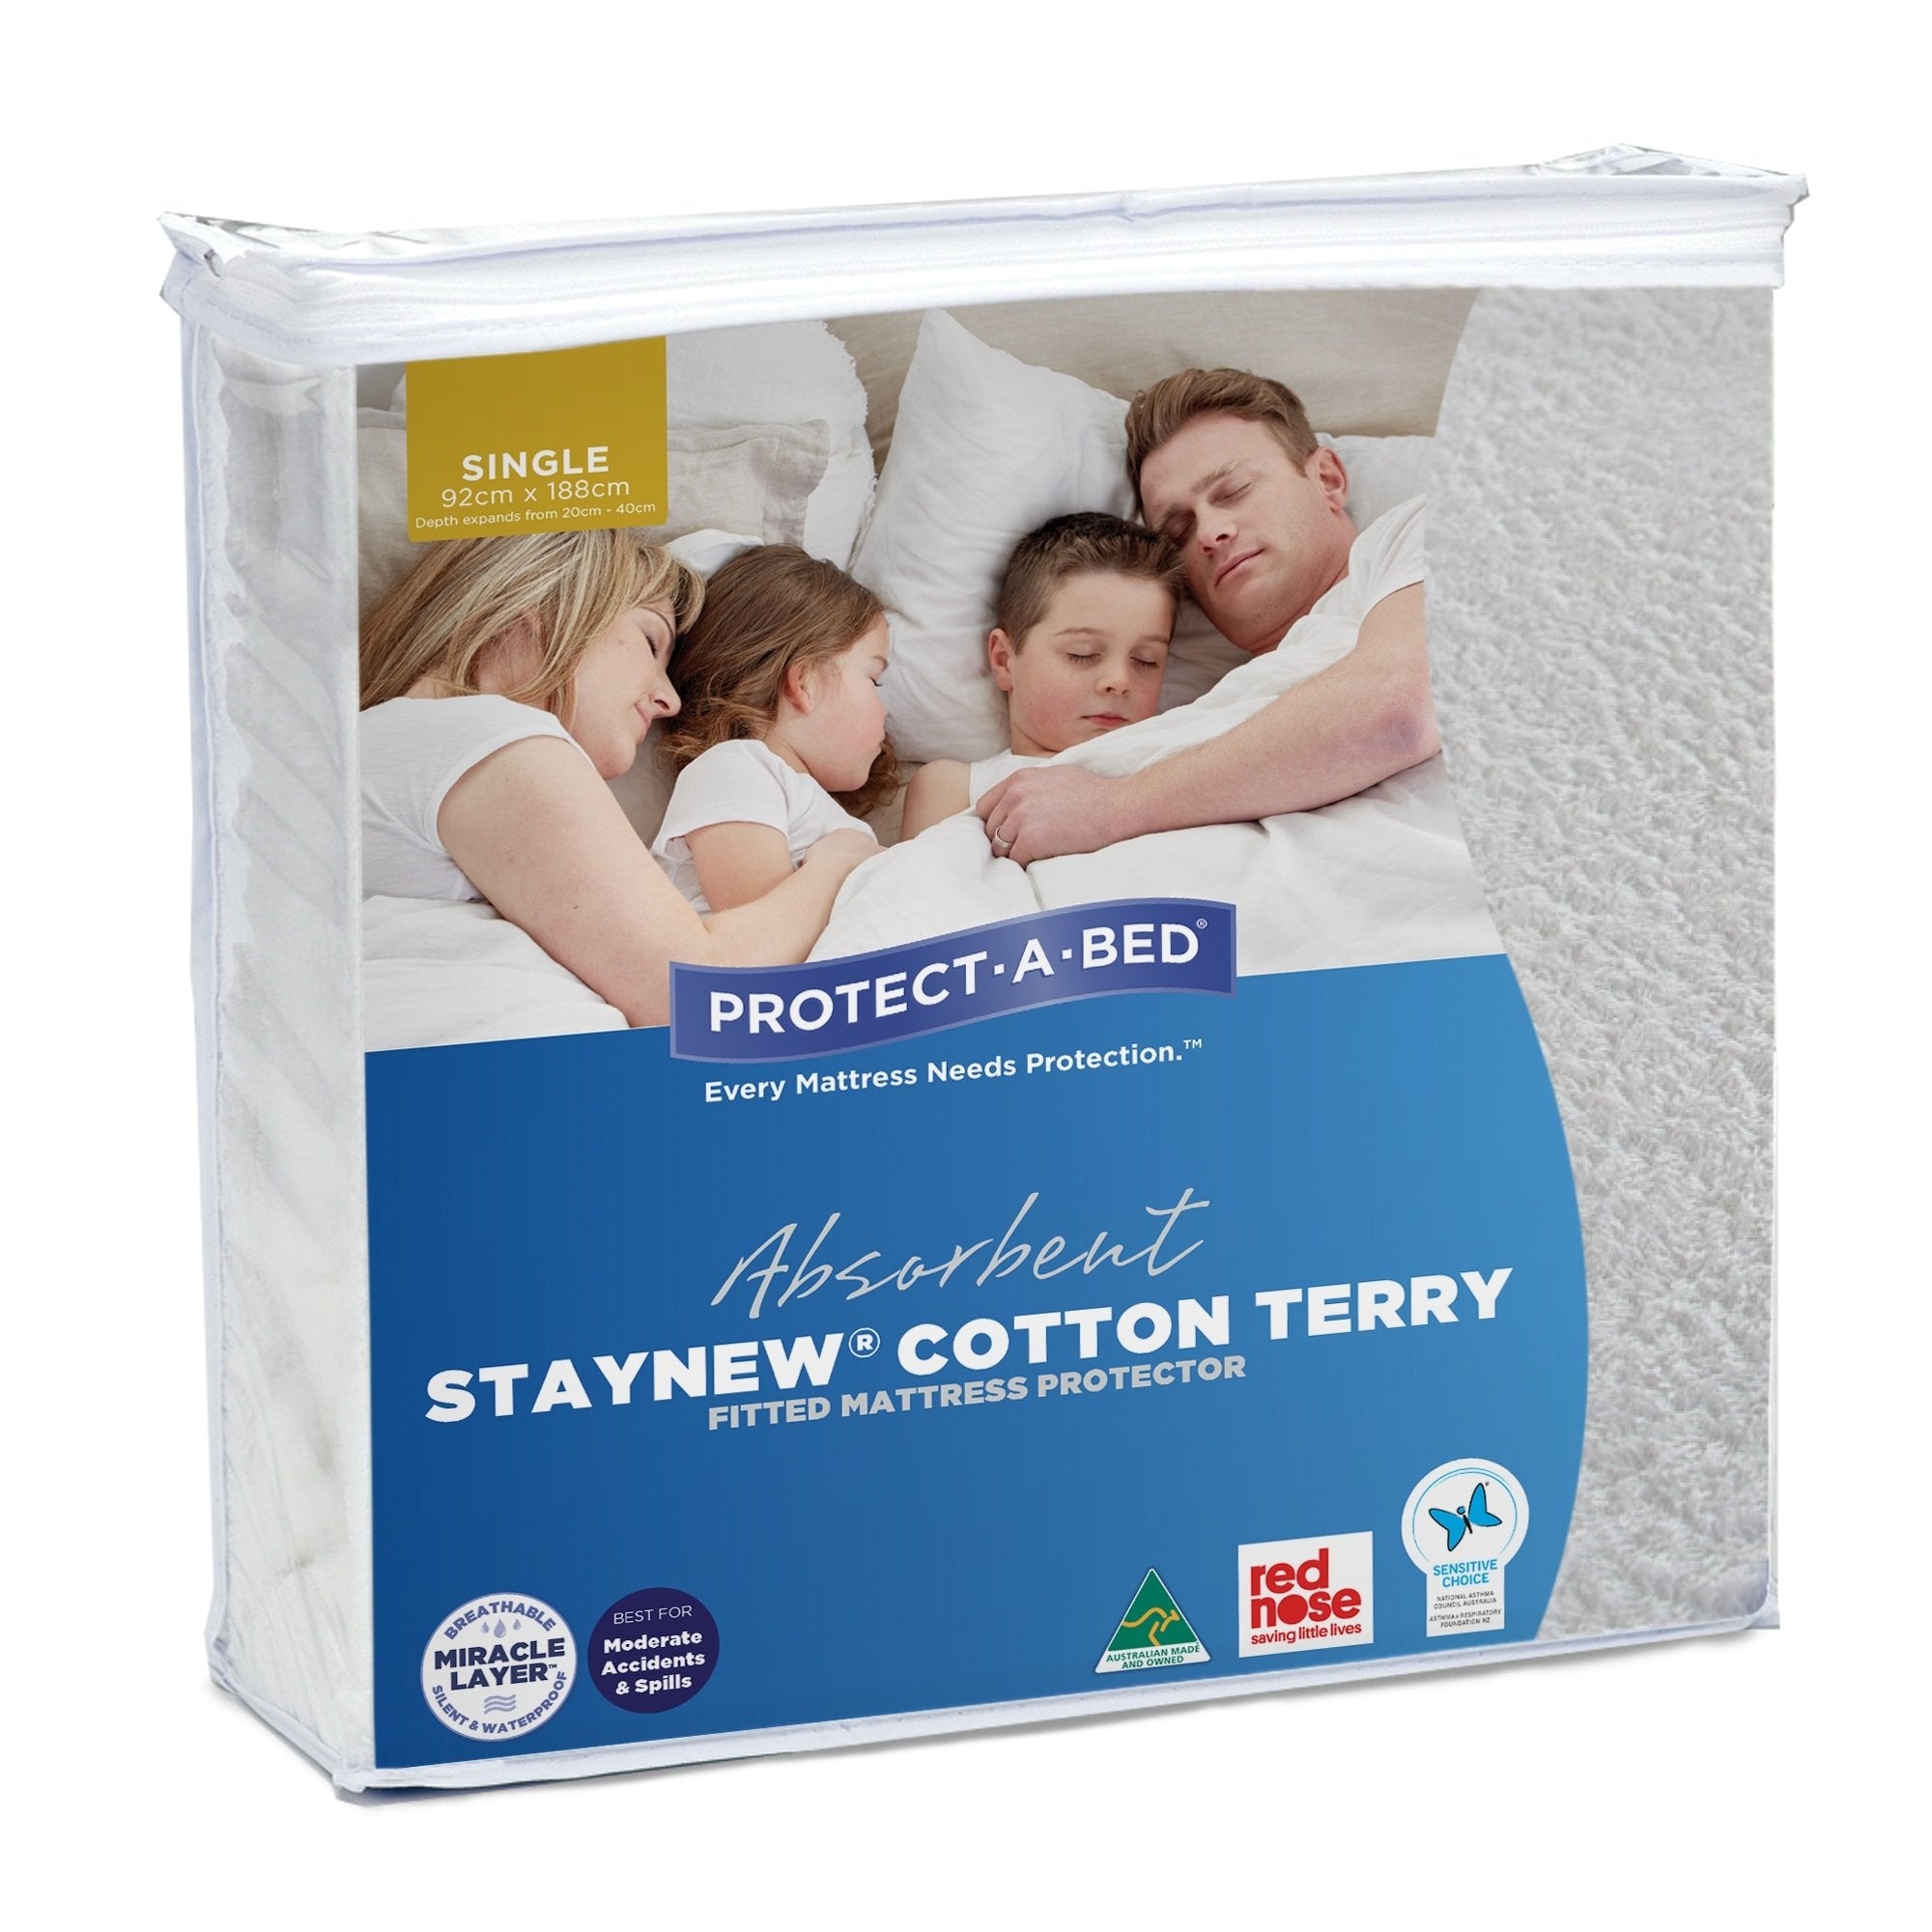 Protect-A-Bed Staynew Mattress Protector - Mattress & Pillow ScienceProtection